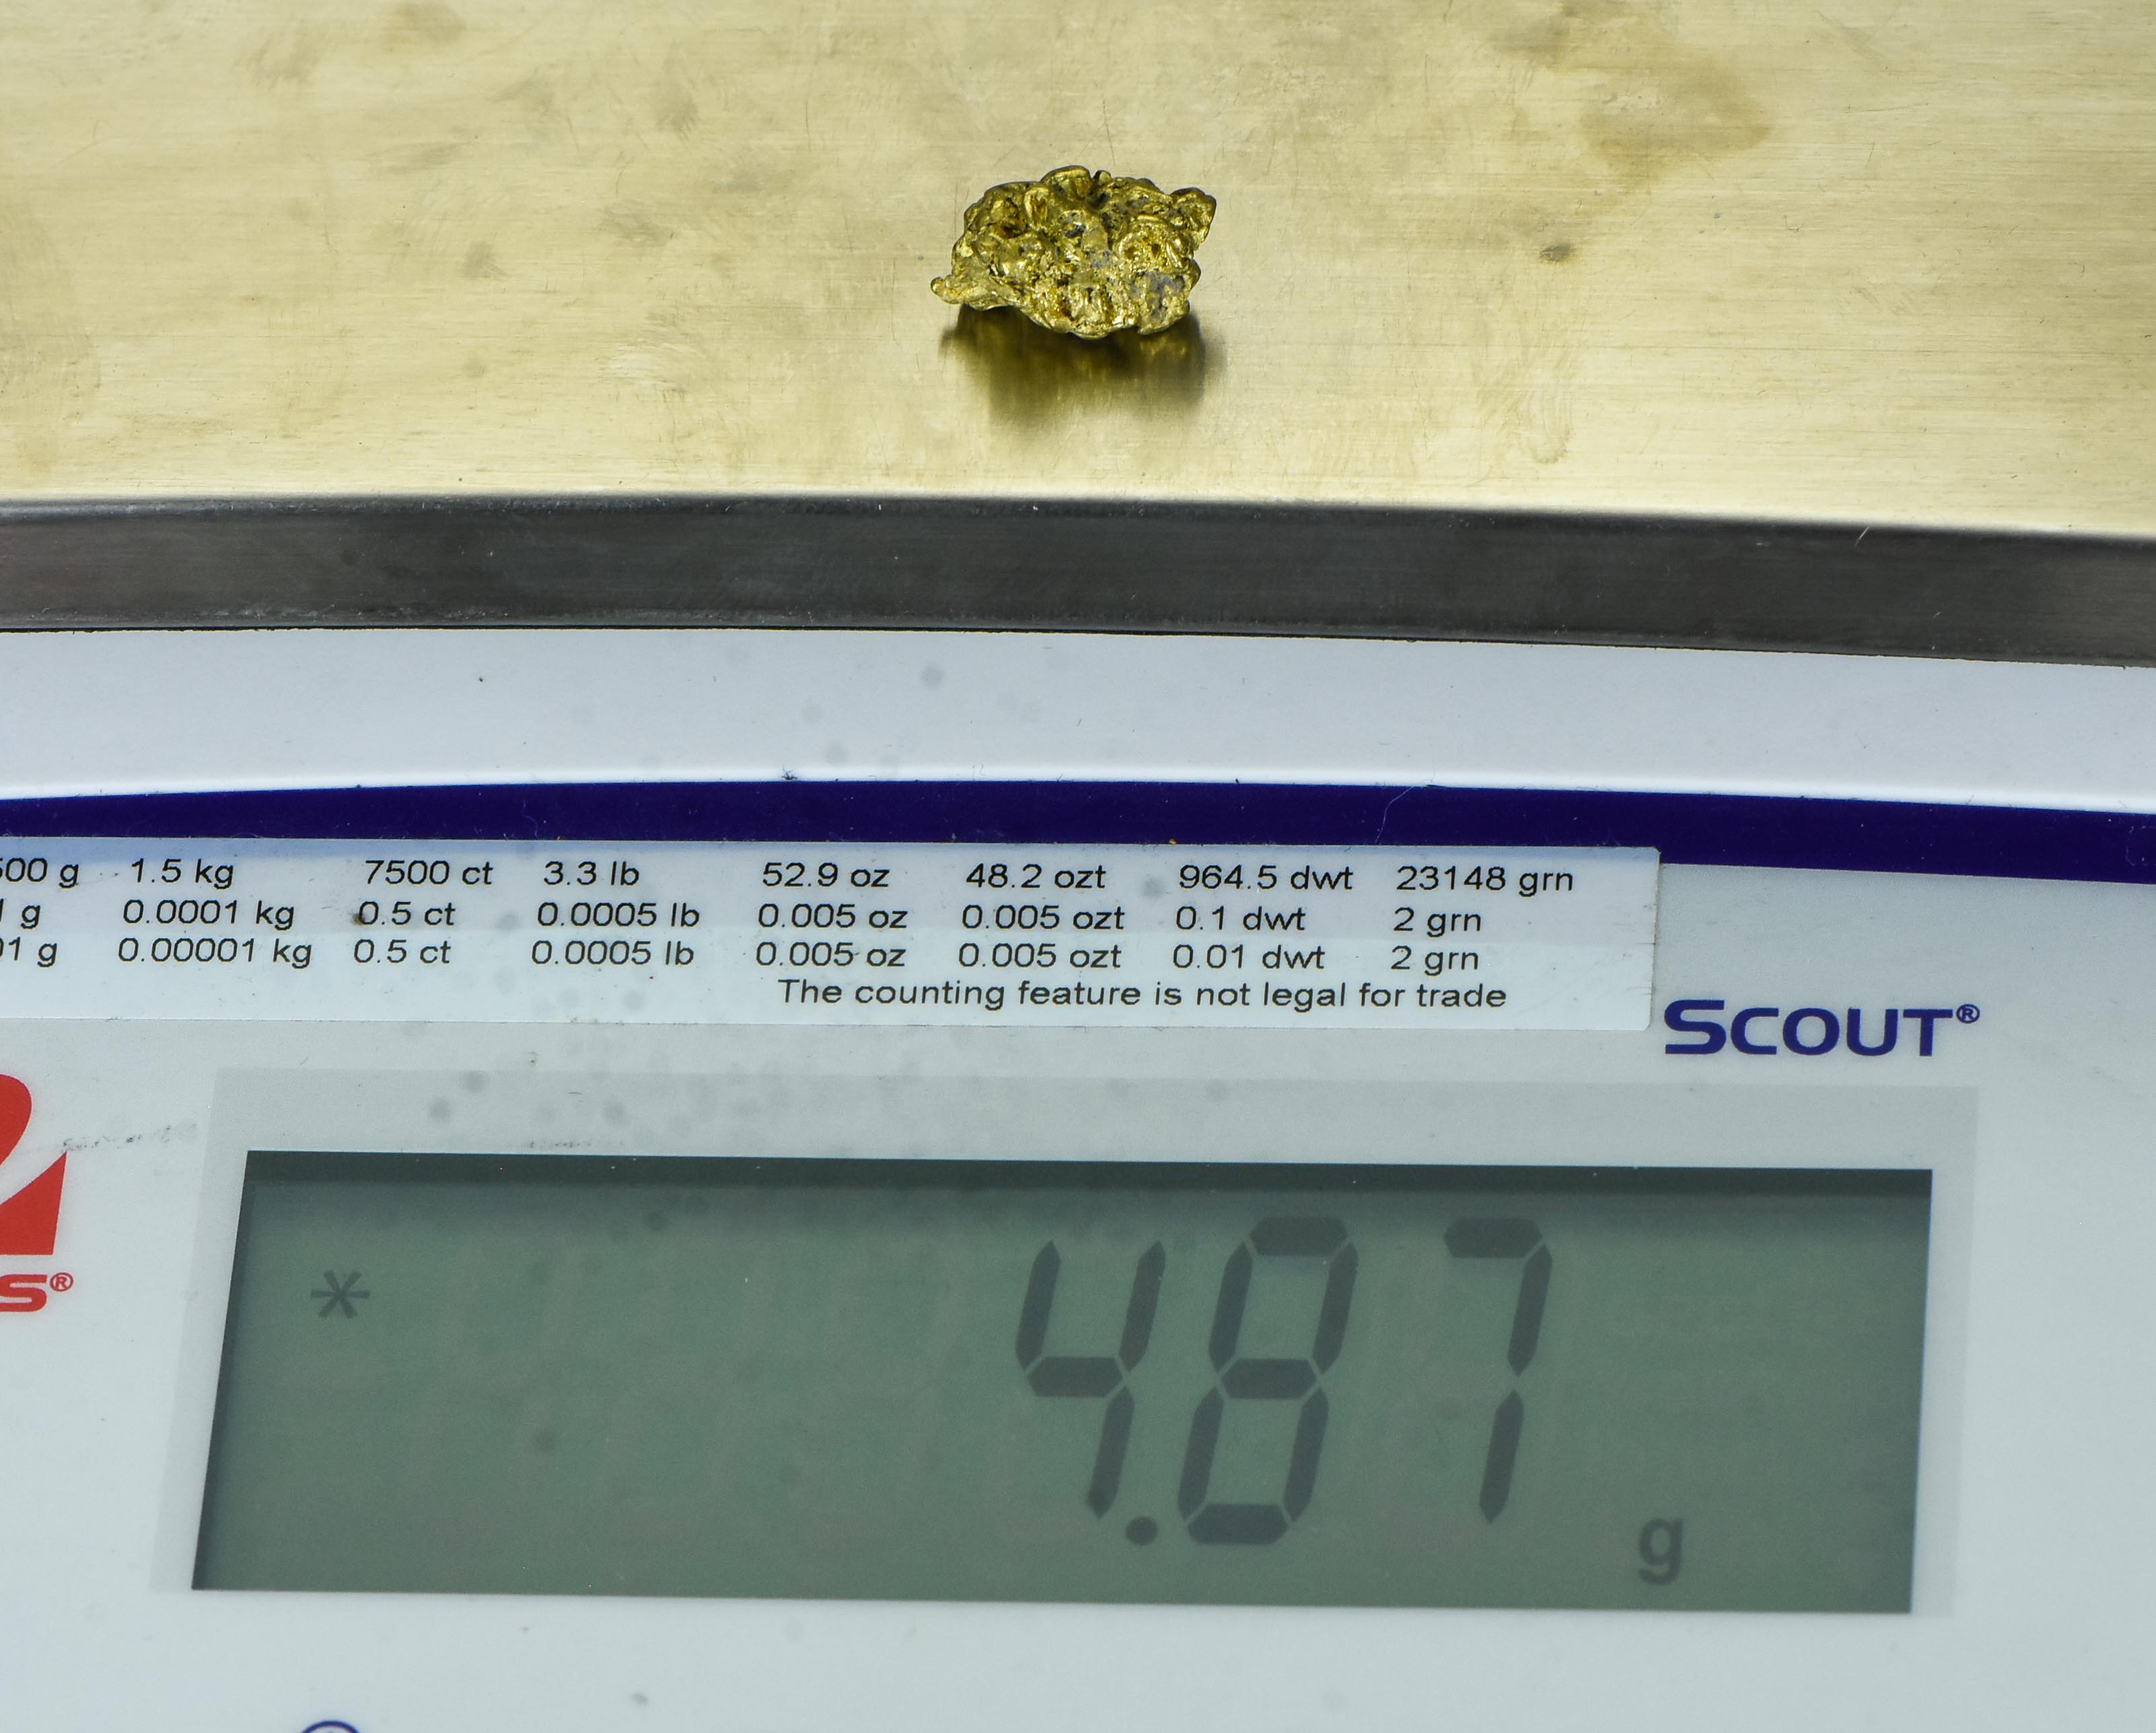 L-127 Alaskan BC Exotic Shaped Gold Nugget "Special Collection" 4.87 Grams